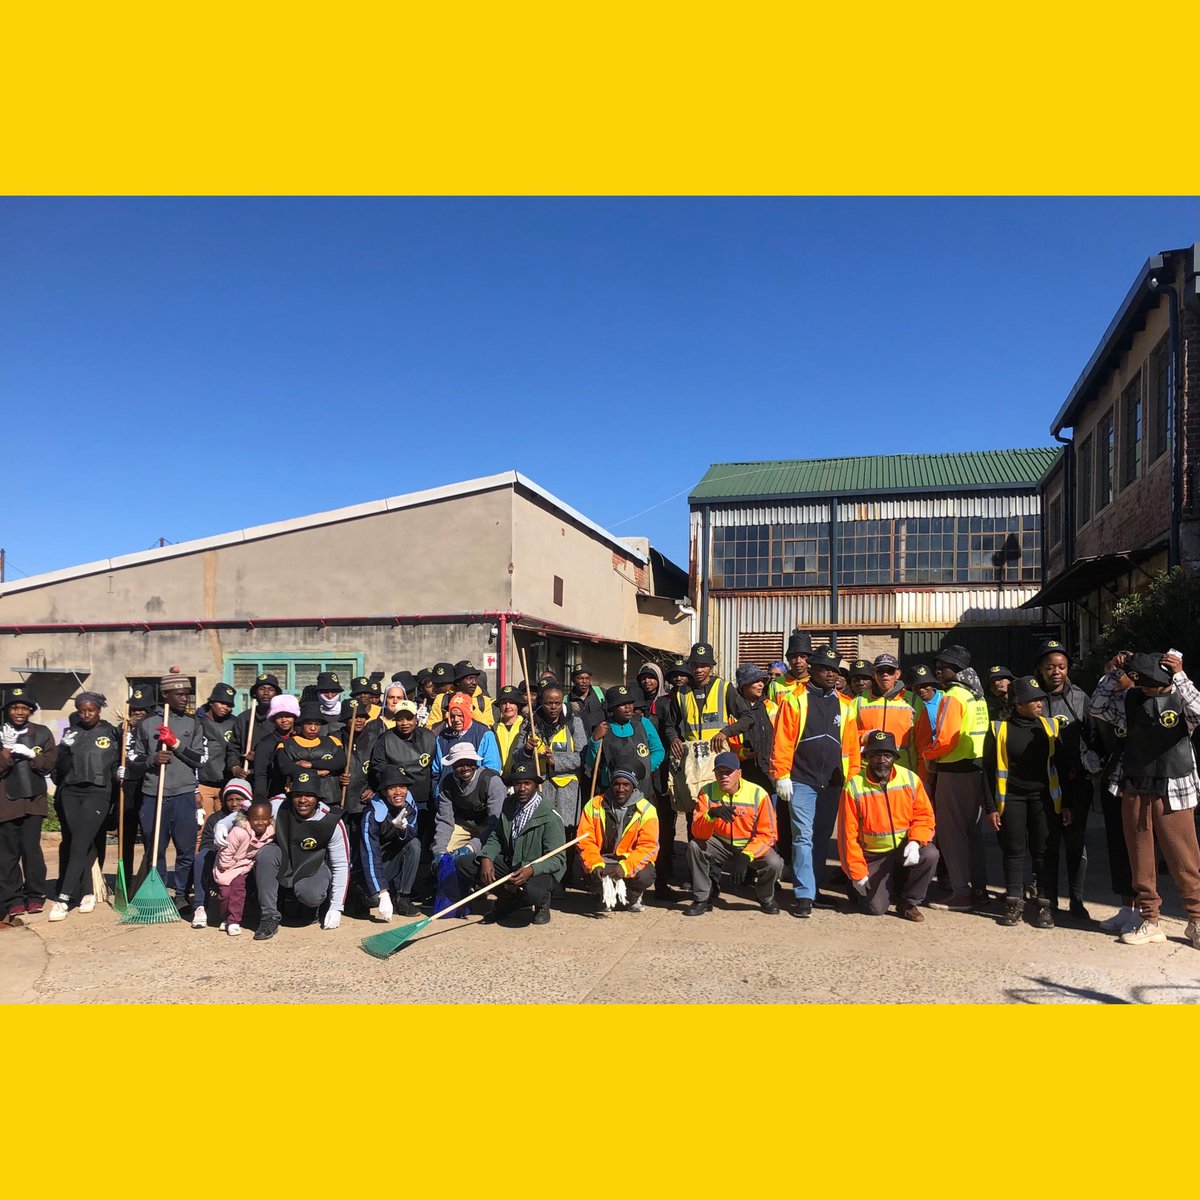 Today, we'd like to give a big thank you to all the organisations and volunteers that came together for the community clean up on Youth Day!#youthday #communitycleanup @CleanerJoburg #partofmore @JhbPartnership #makersvalleycommunity @CityofJoburgZA #socialemploymentfund